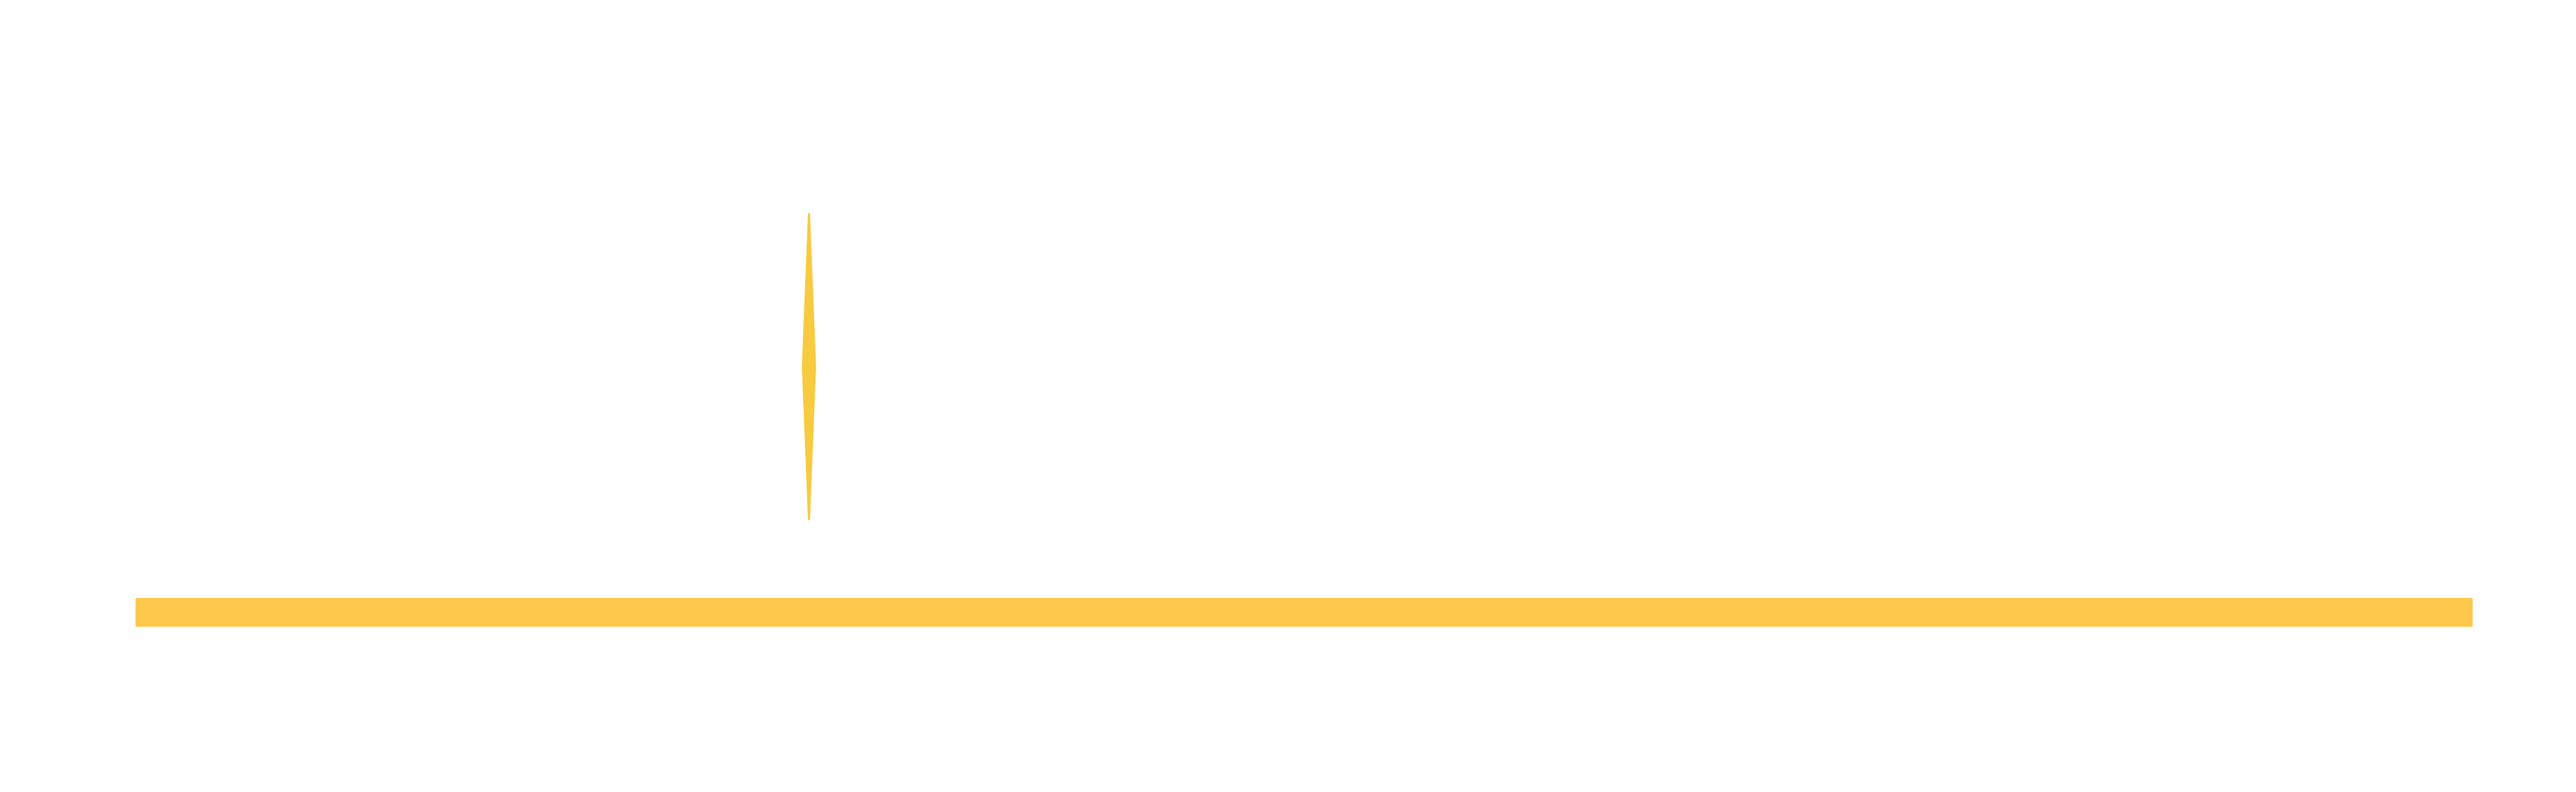 School of Arts, Education, Humanities, and Social Sciences